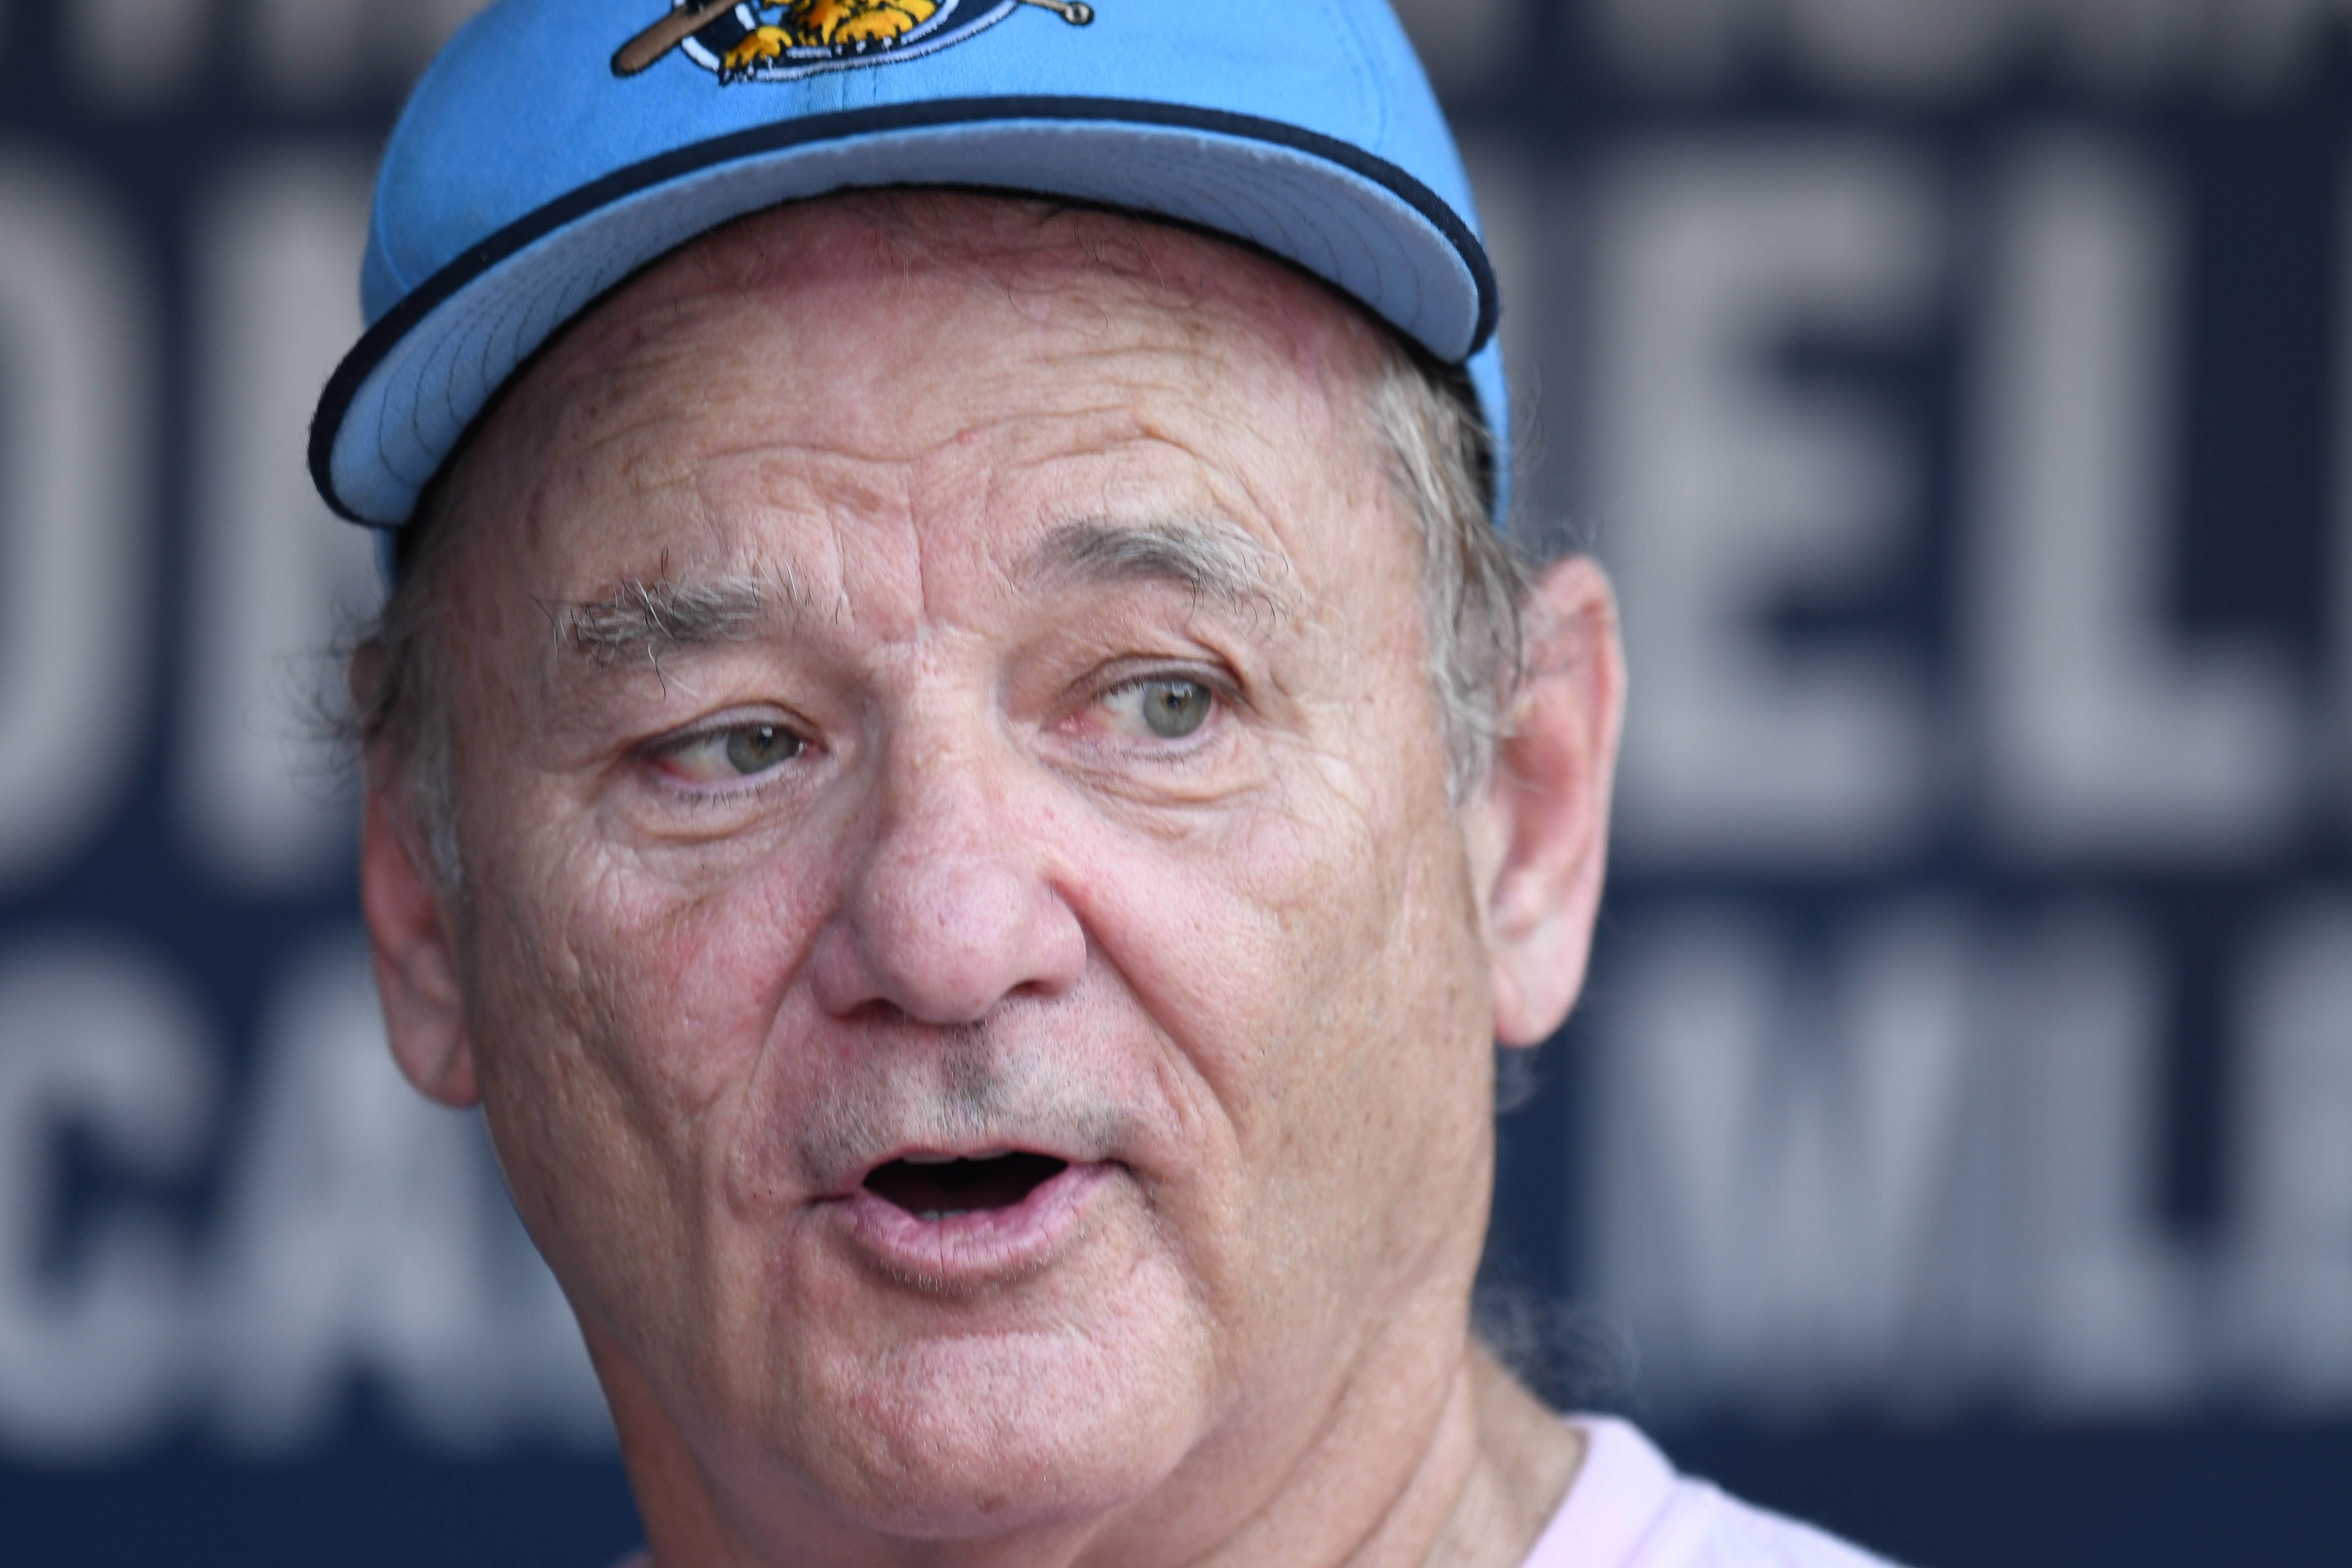 Cubs fan Bill Murray has a potential Game 7 conflict